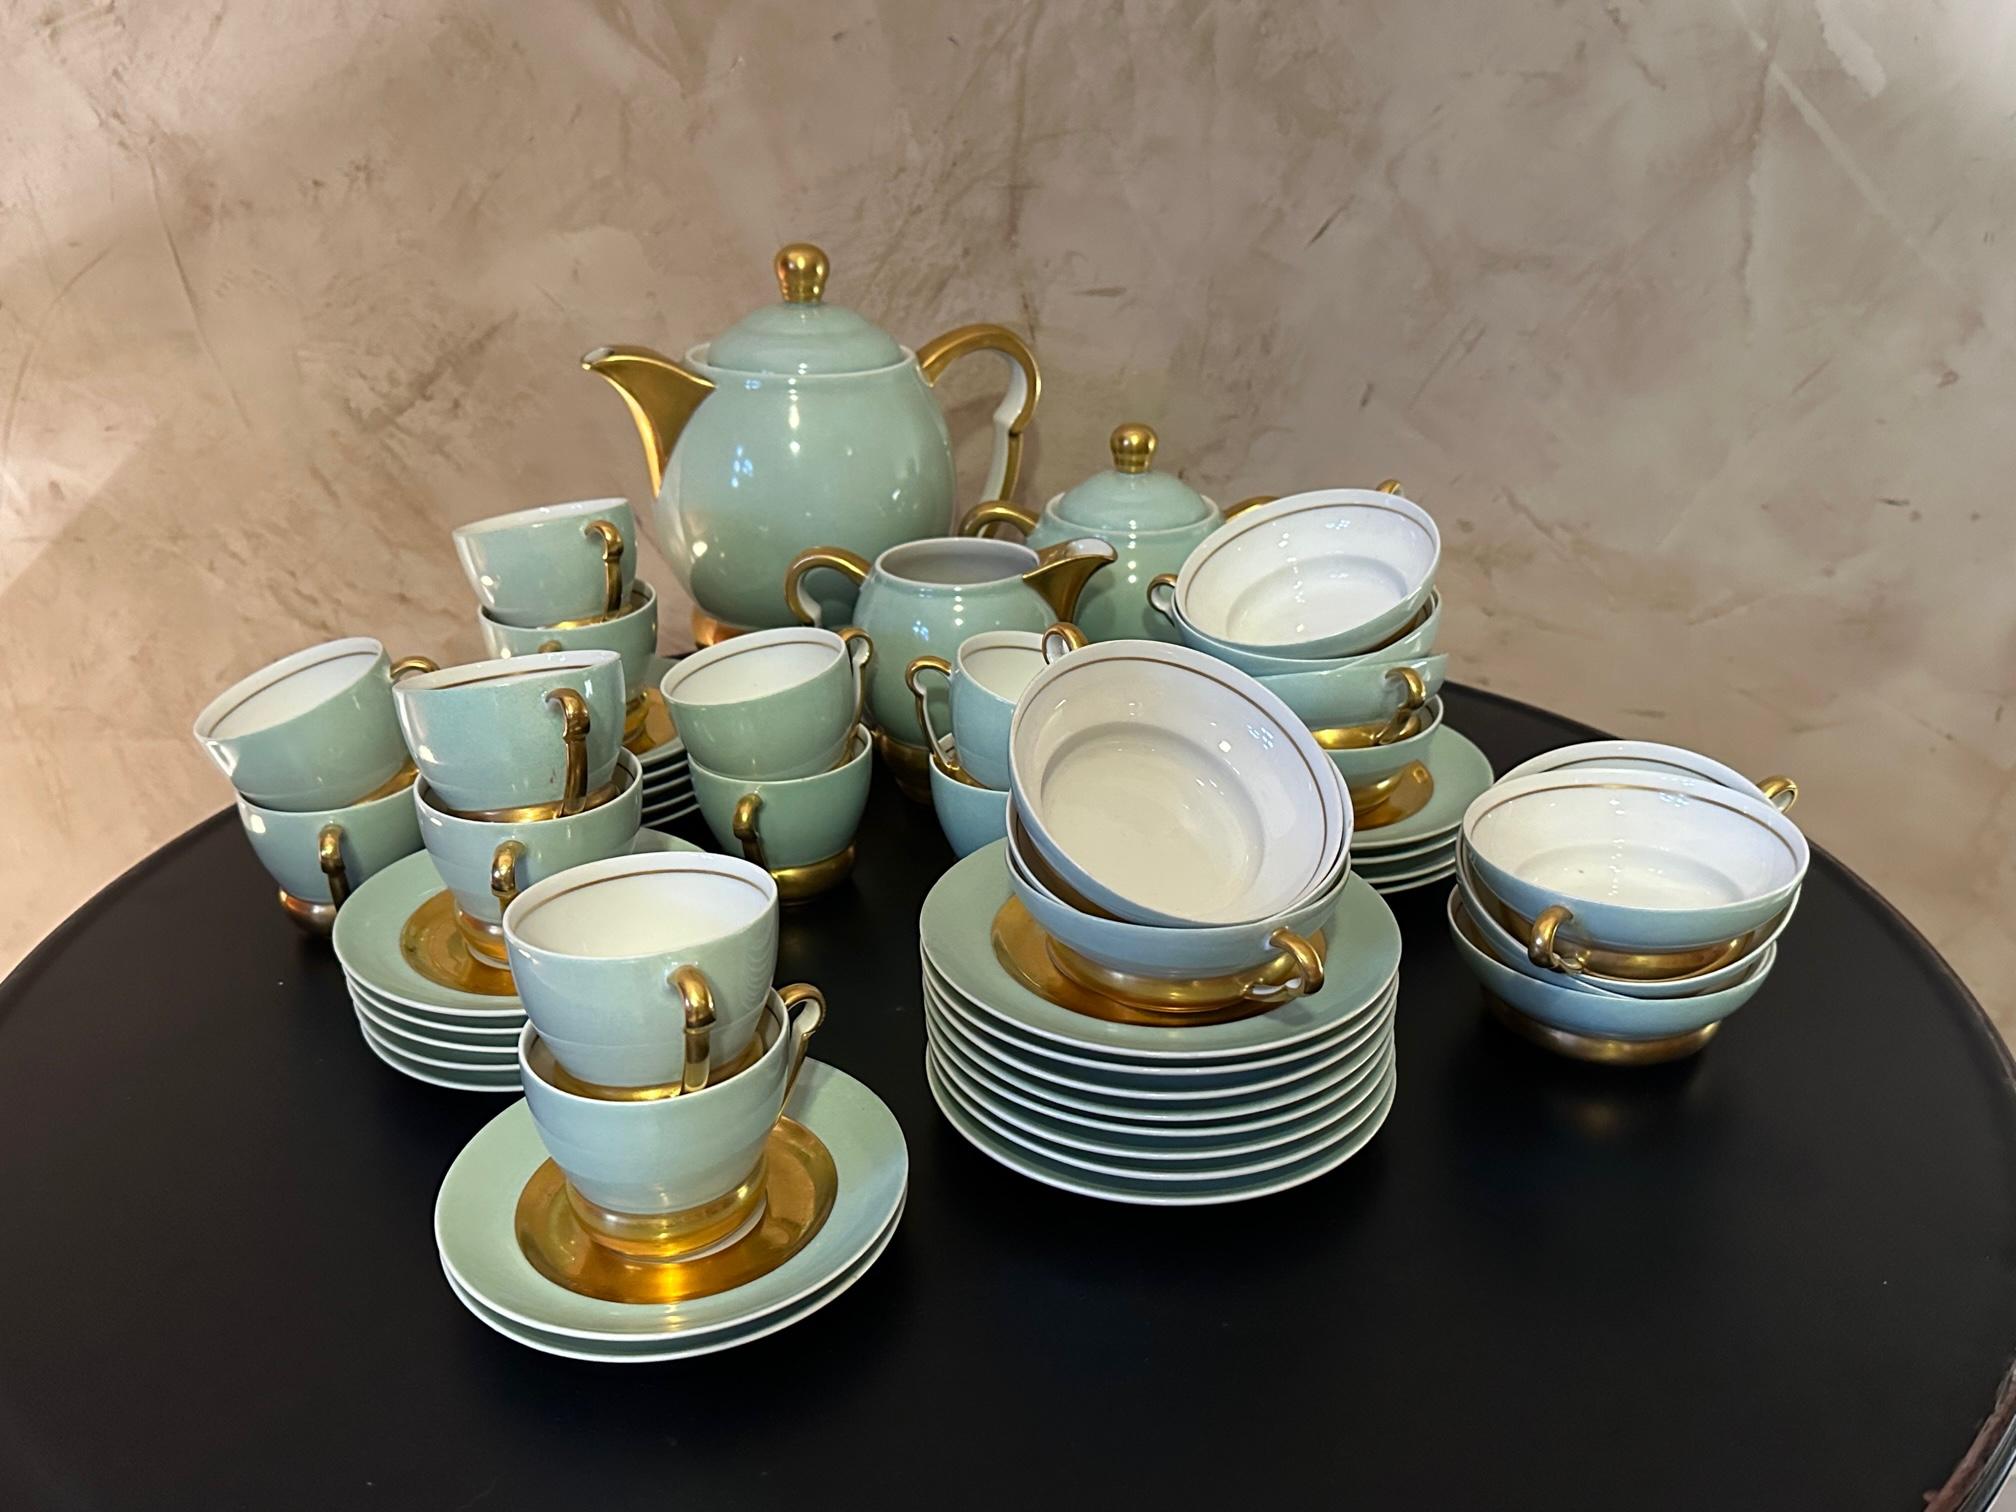 Beautiful coffee and tea service from the 1930s in Limoges porcelain by Raynaud (stamp under each piece), consisting of a teapot, a milk jug, a sugar bowl, 12 coffee cups and their saucers and 12 tea cups and their saucers. Pretty pastel green and